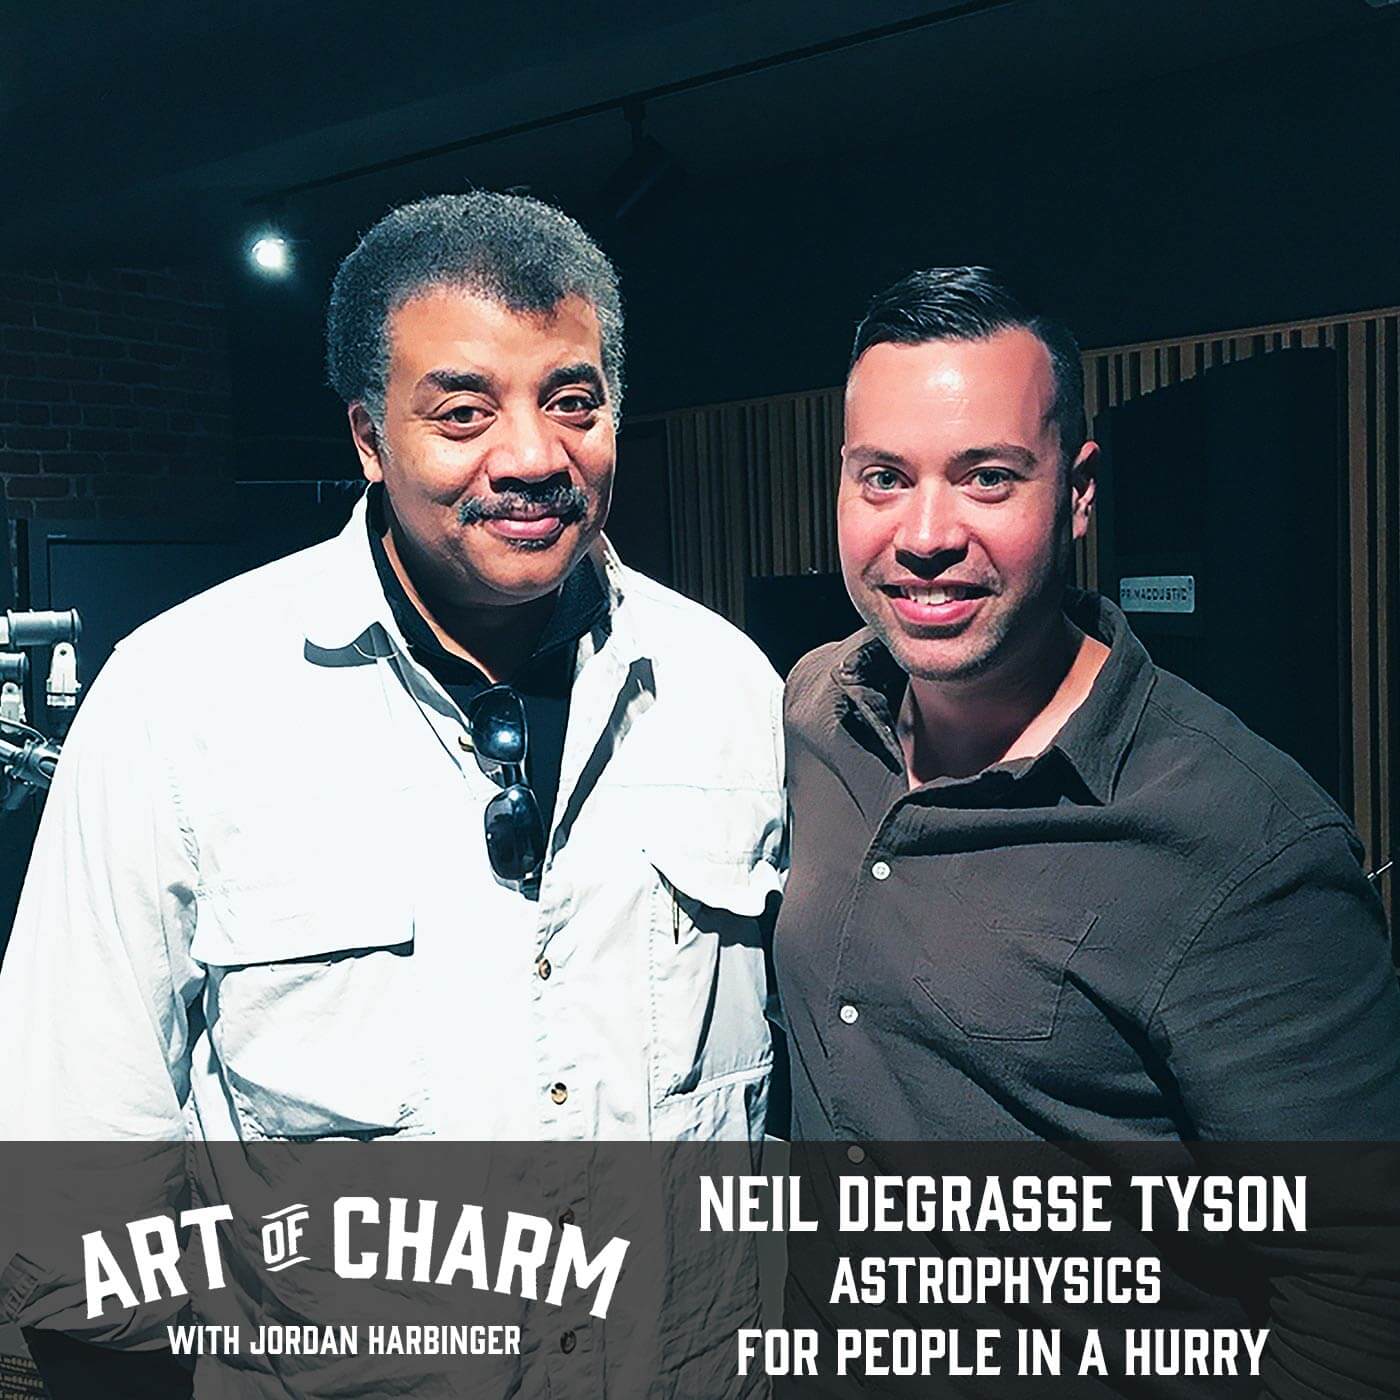 Neil deGrasse Tyson | Astrophysics for People in a Hurry (Episode 617)